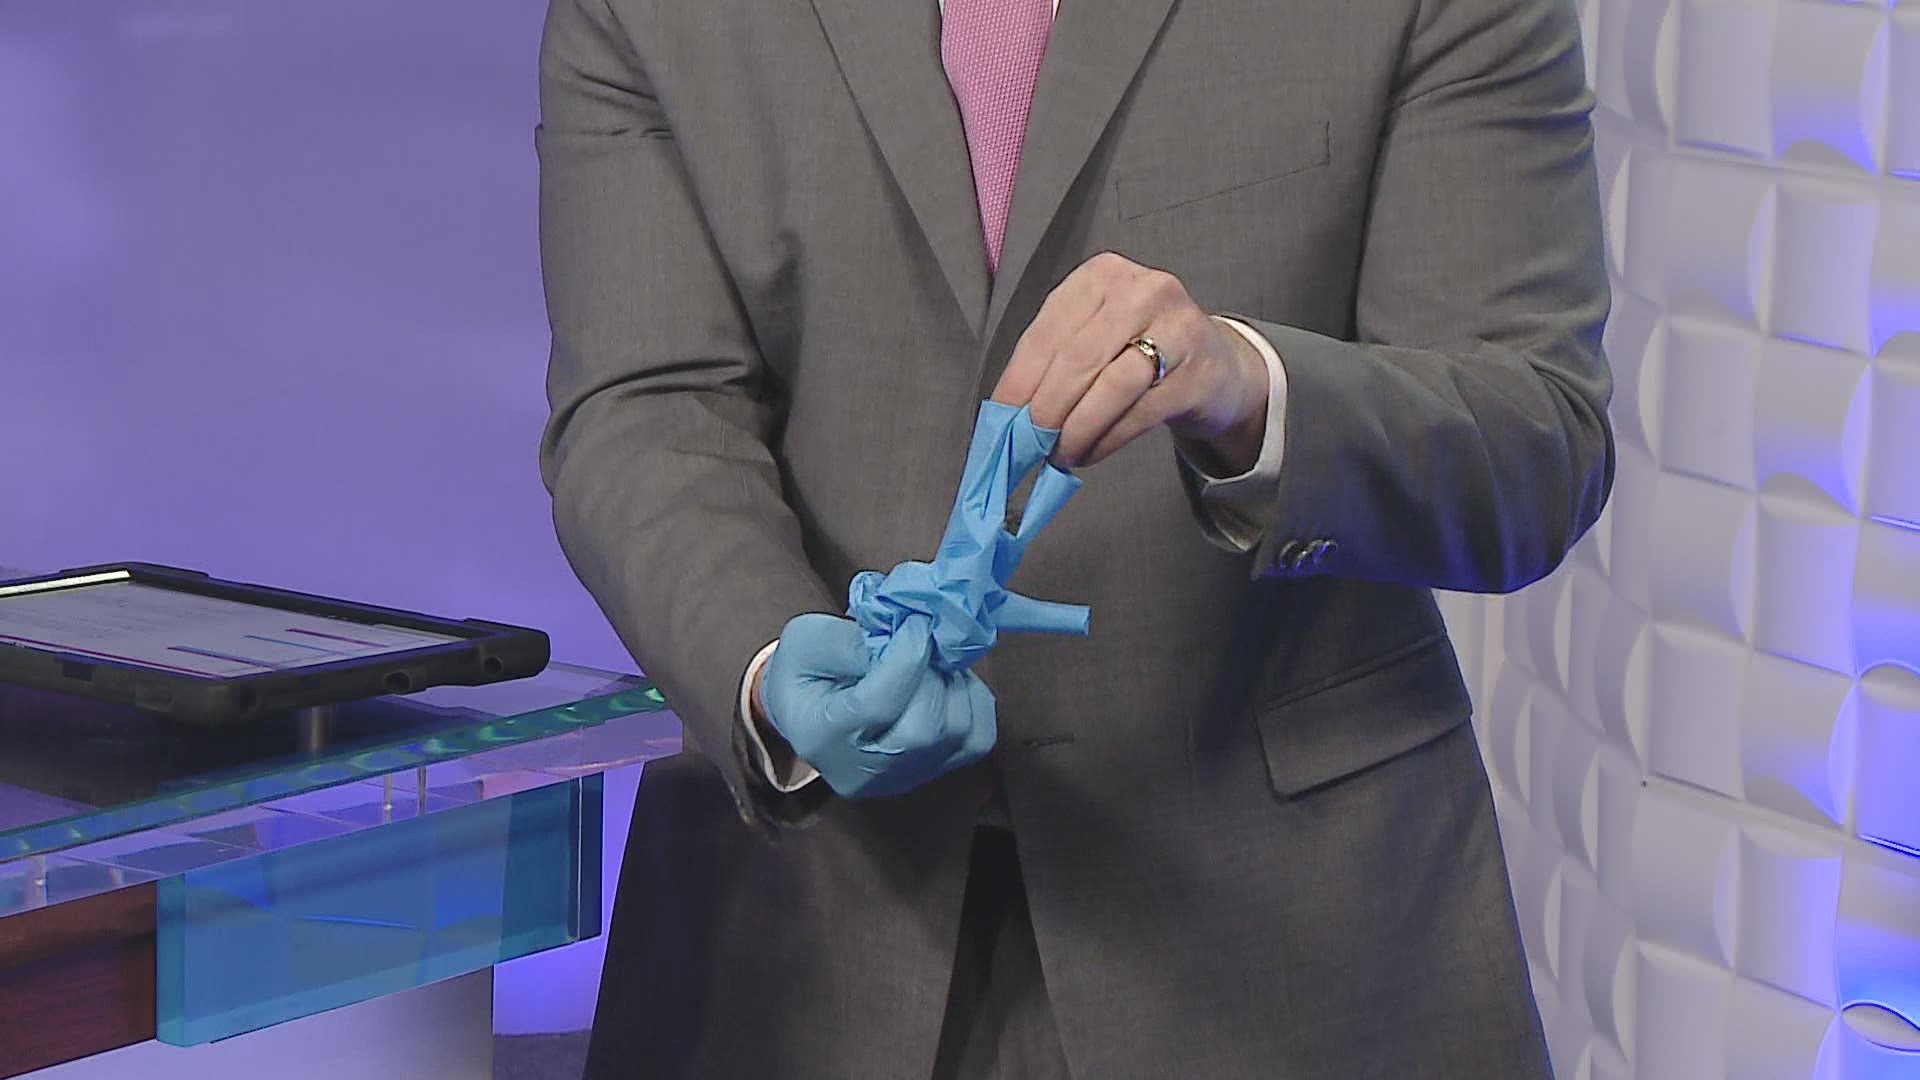 NEWS CENTER Maine's Clay Gordon shows us how to properly take off gloves to avoid spreading germs amid the coronavirus pandemic.